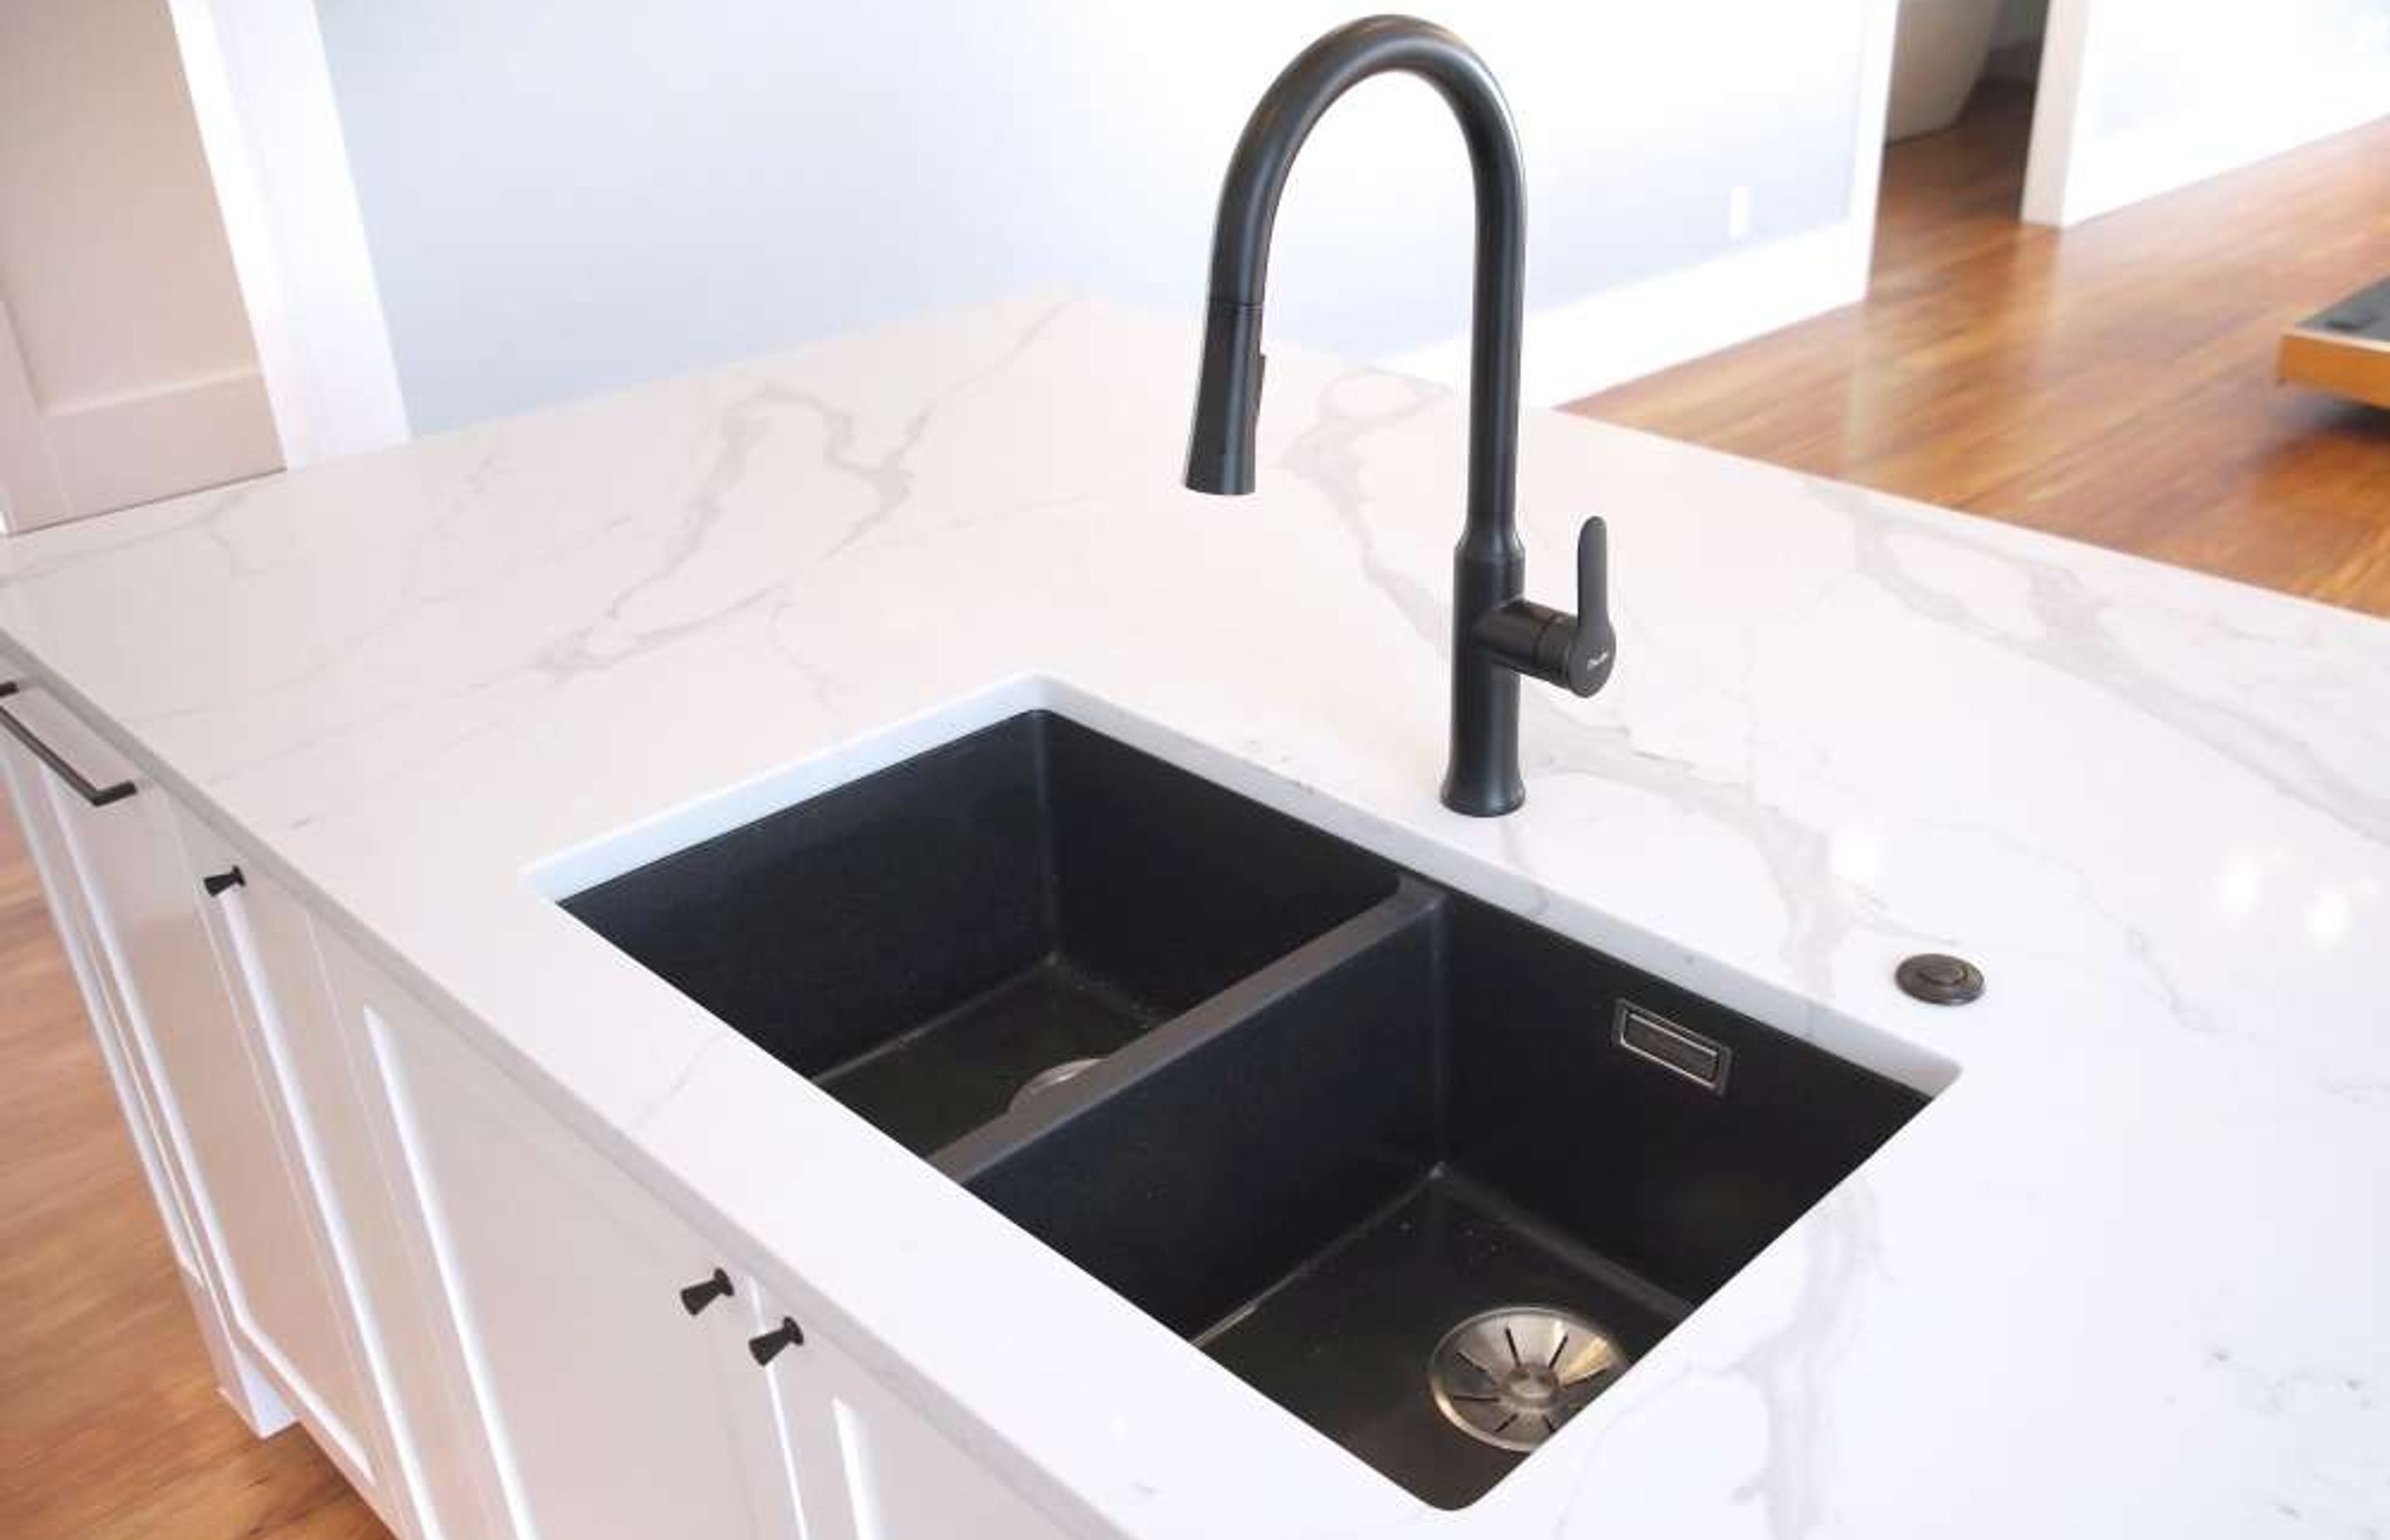 Black Silgranit Sink used for this Classic Kitchen renovation in Epsom, Central Auckland